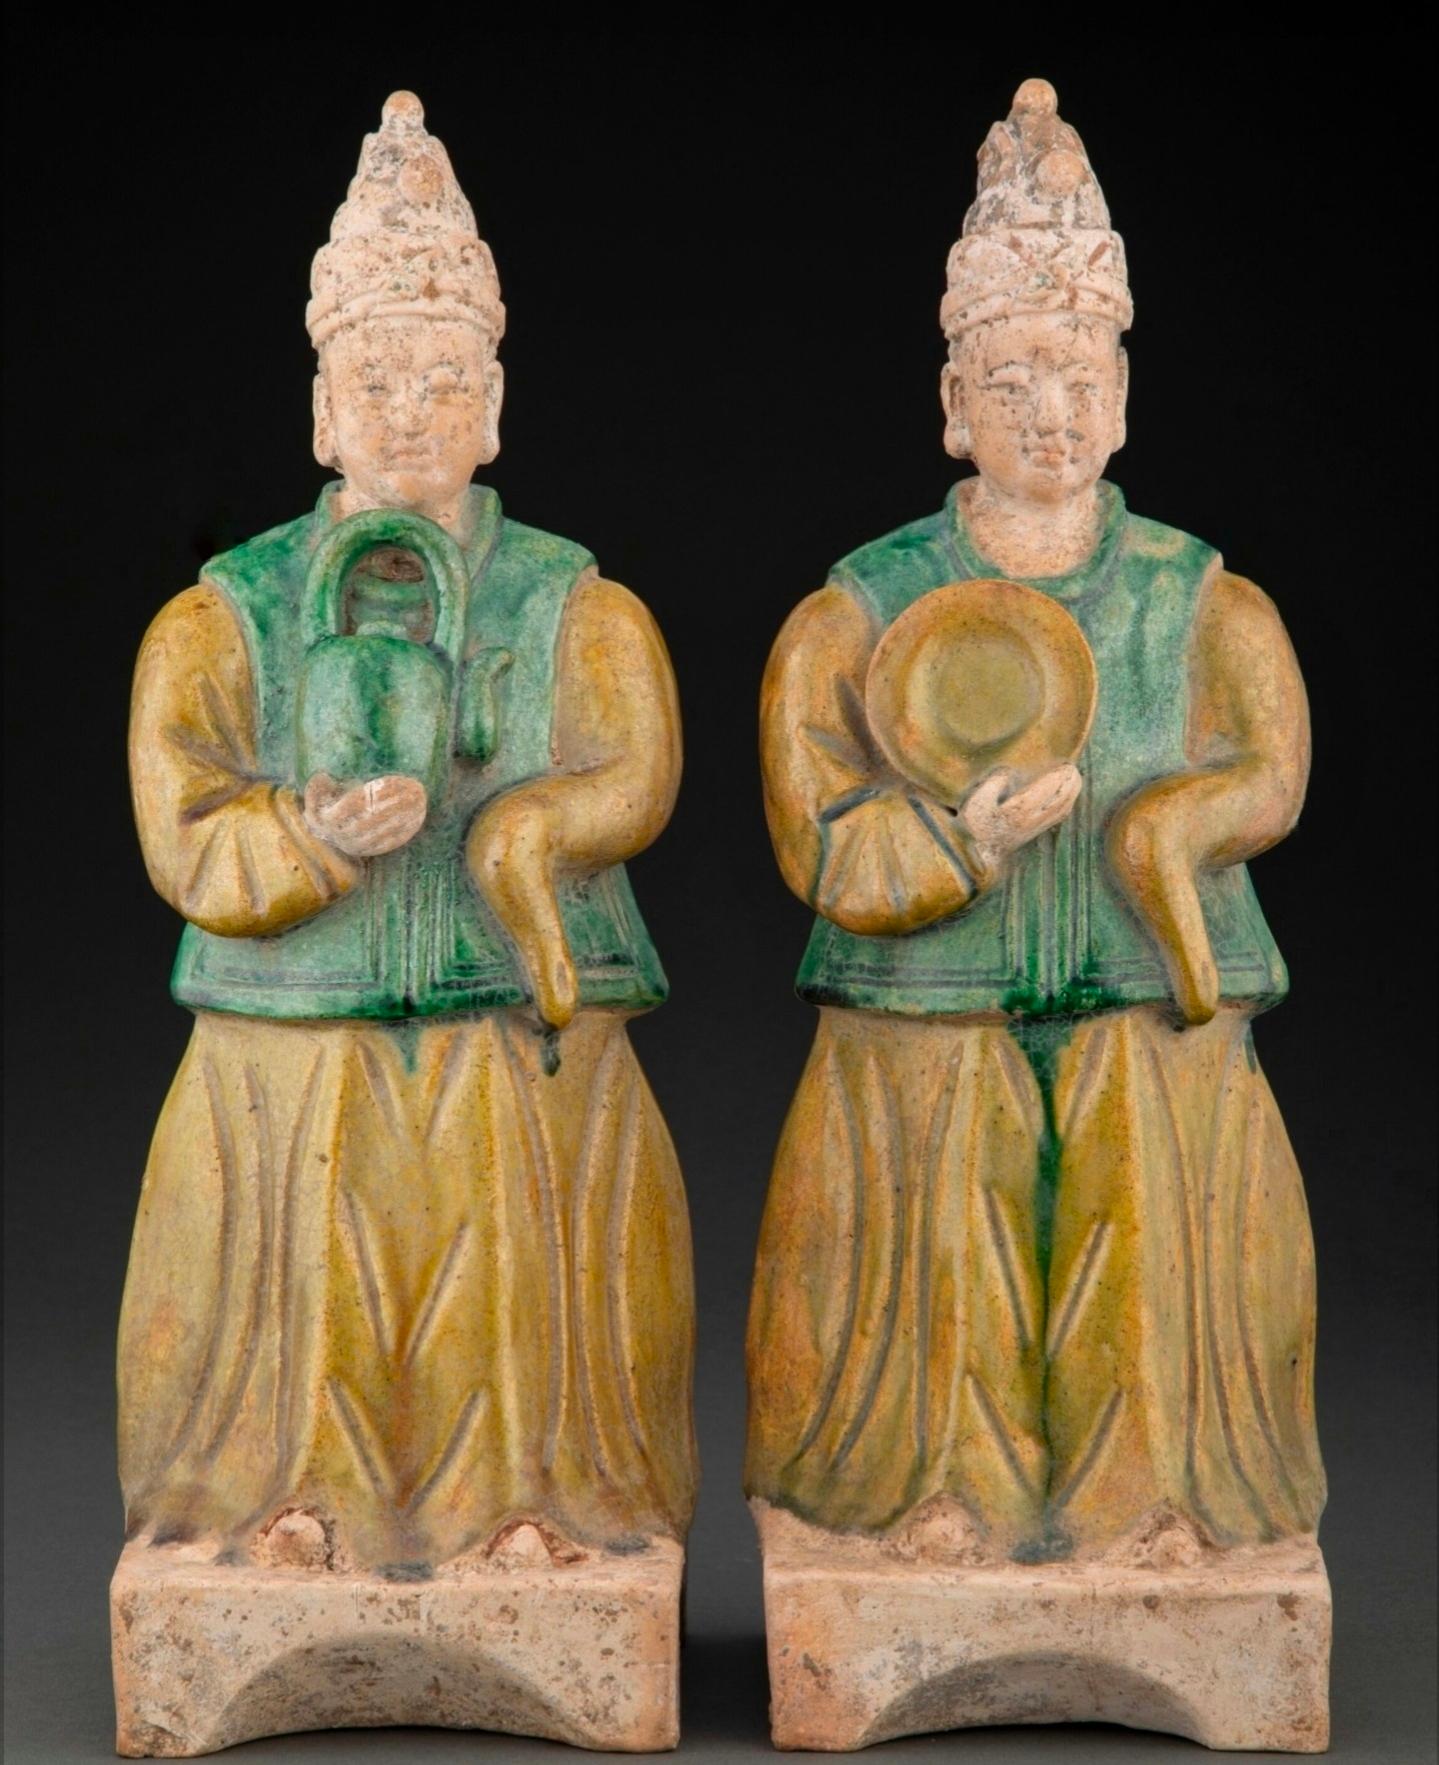 A pair of large antique Chinese polychrome ceramic attendants, Ming Dynasty (1368-1644).

Outstanding 500+ year old Sancai glazed earthenware pottery tomb figures, exceptionally executed figural form, exquisitely detailed, one holding a teapot, the